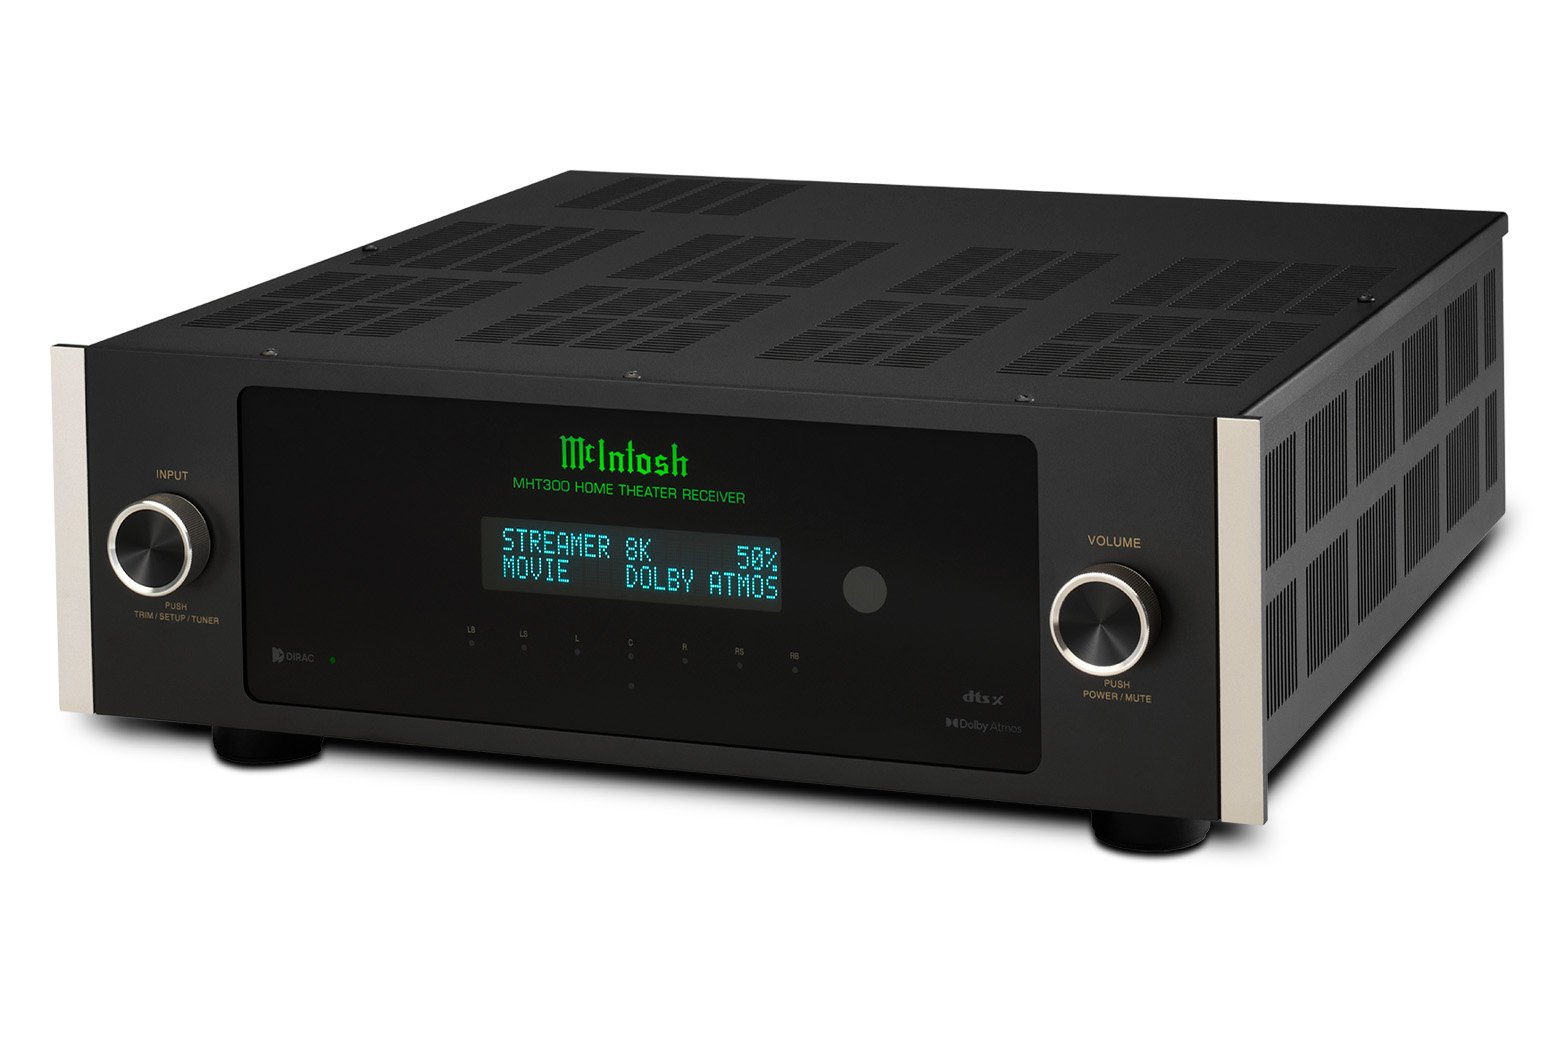 McIntosh MHT300 Home Theater Receiver (In-Store Purchases Only)